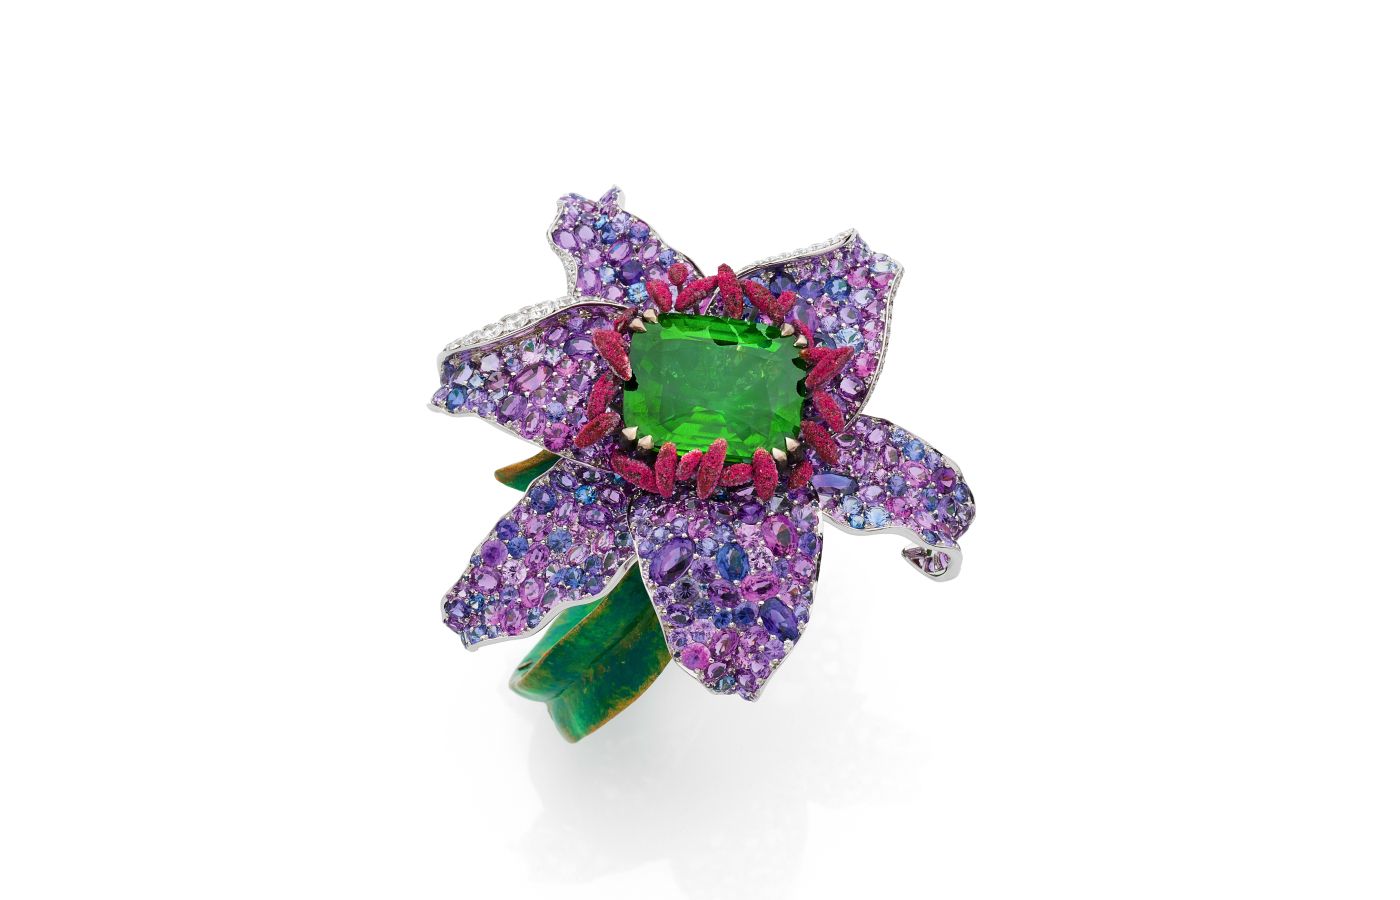 Anna Hu Enchanted Lily Bangle in Peridot in rose gold, green enamel, purple-red enamel, rock crystal, purple sapphires, diamonds and a 53.92-ct peridot